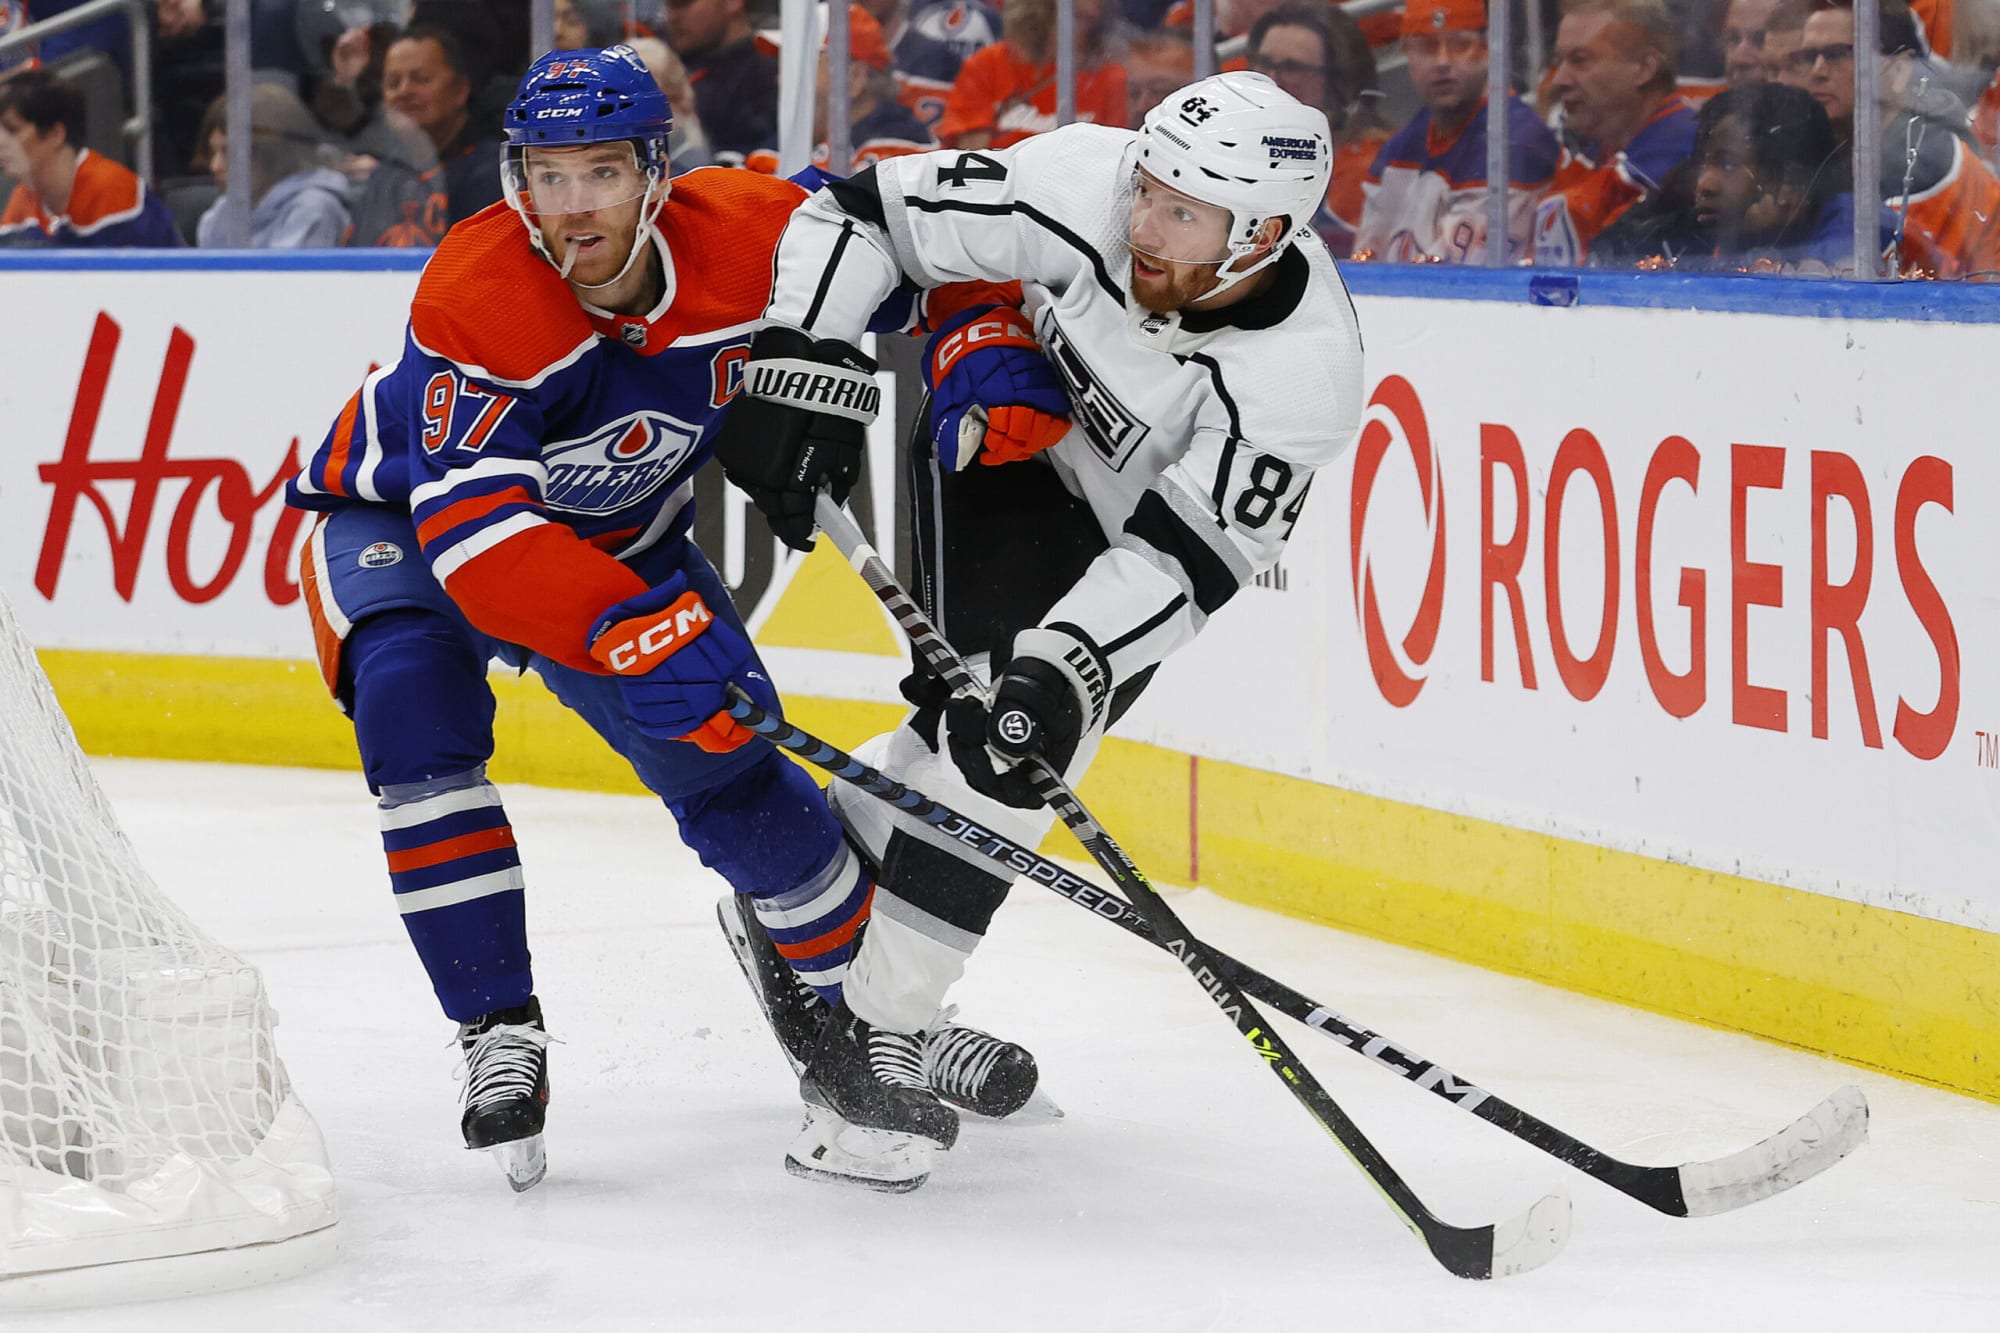 Oilers vs. Kings prediction and odds for NHL Playoffs Game 6